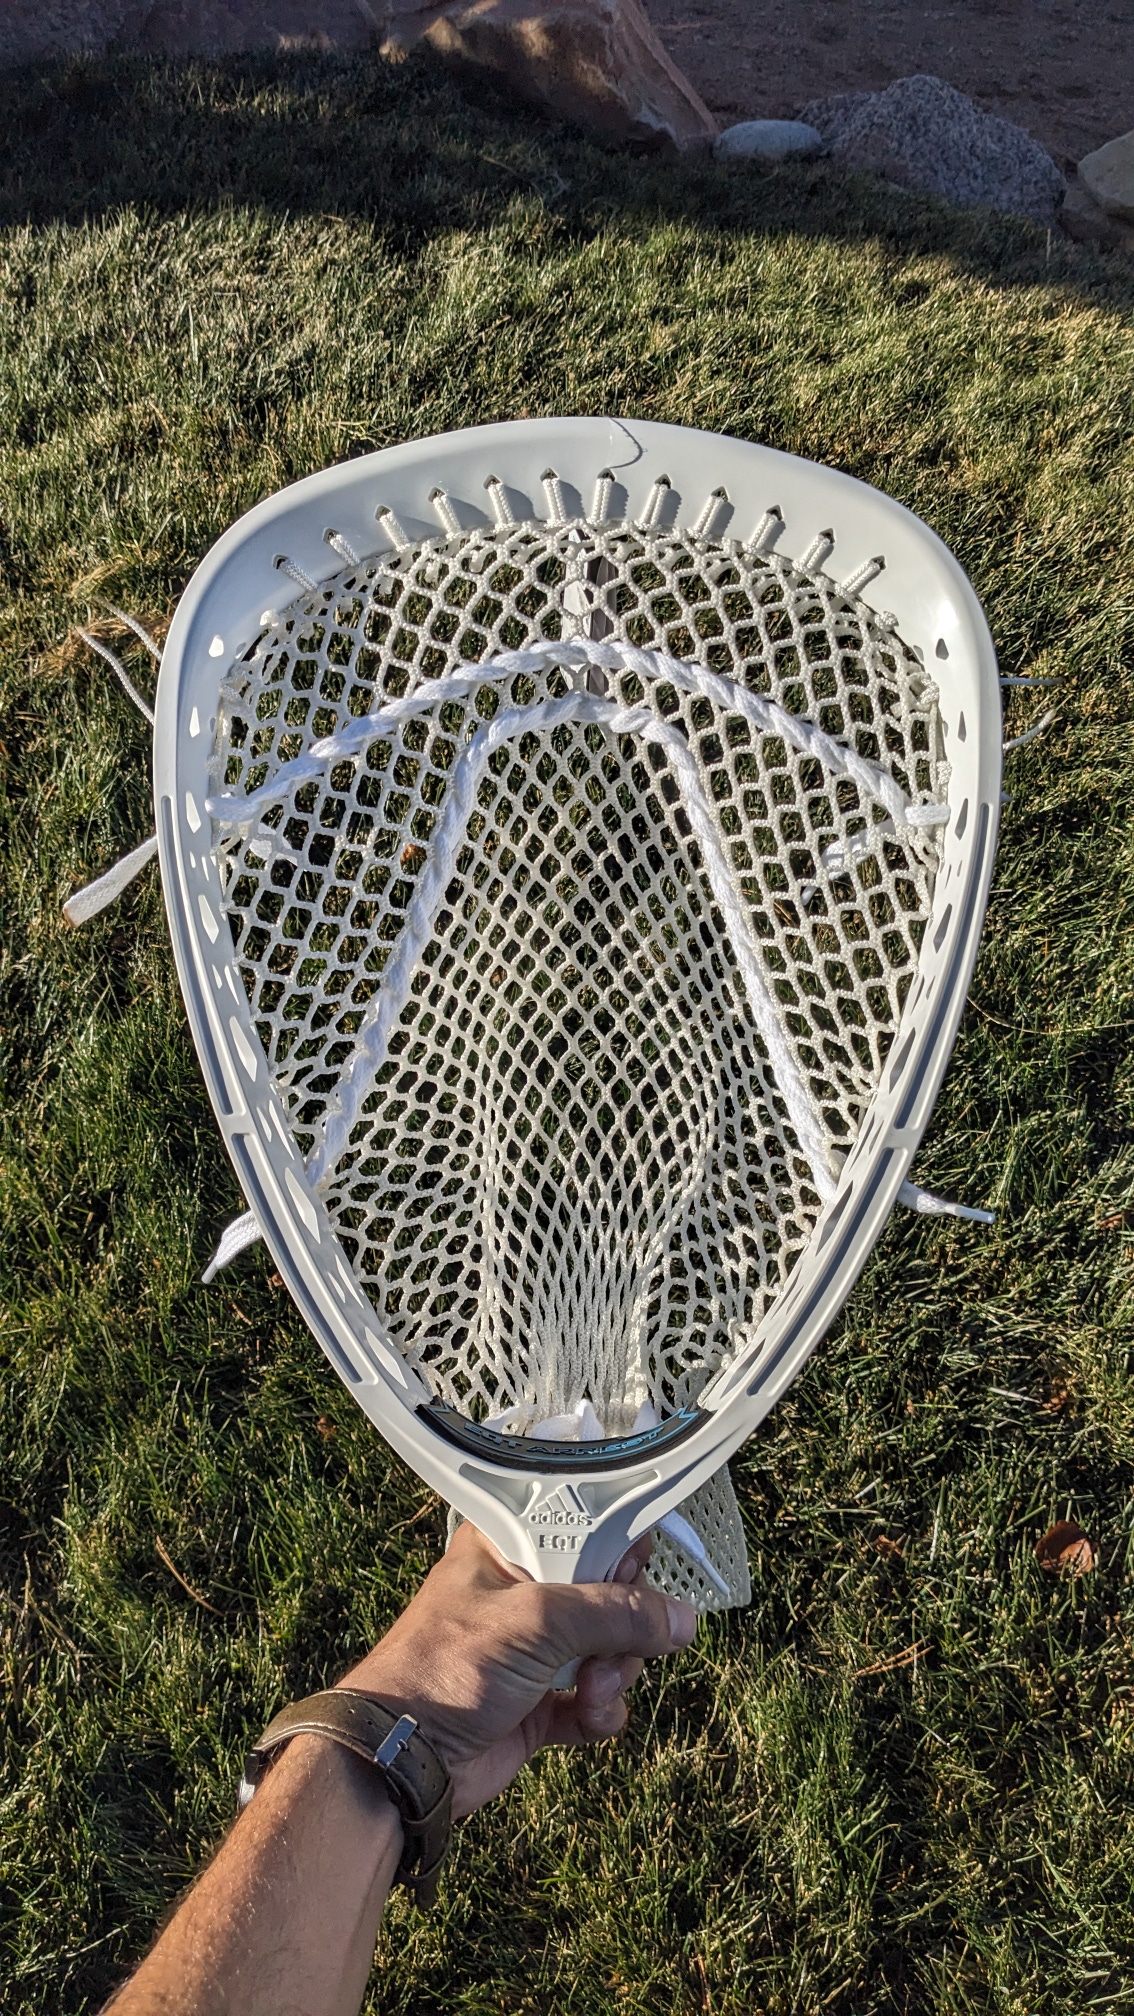 New Strung Adidas EQT Arrest Goalie Head With Tags